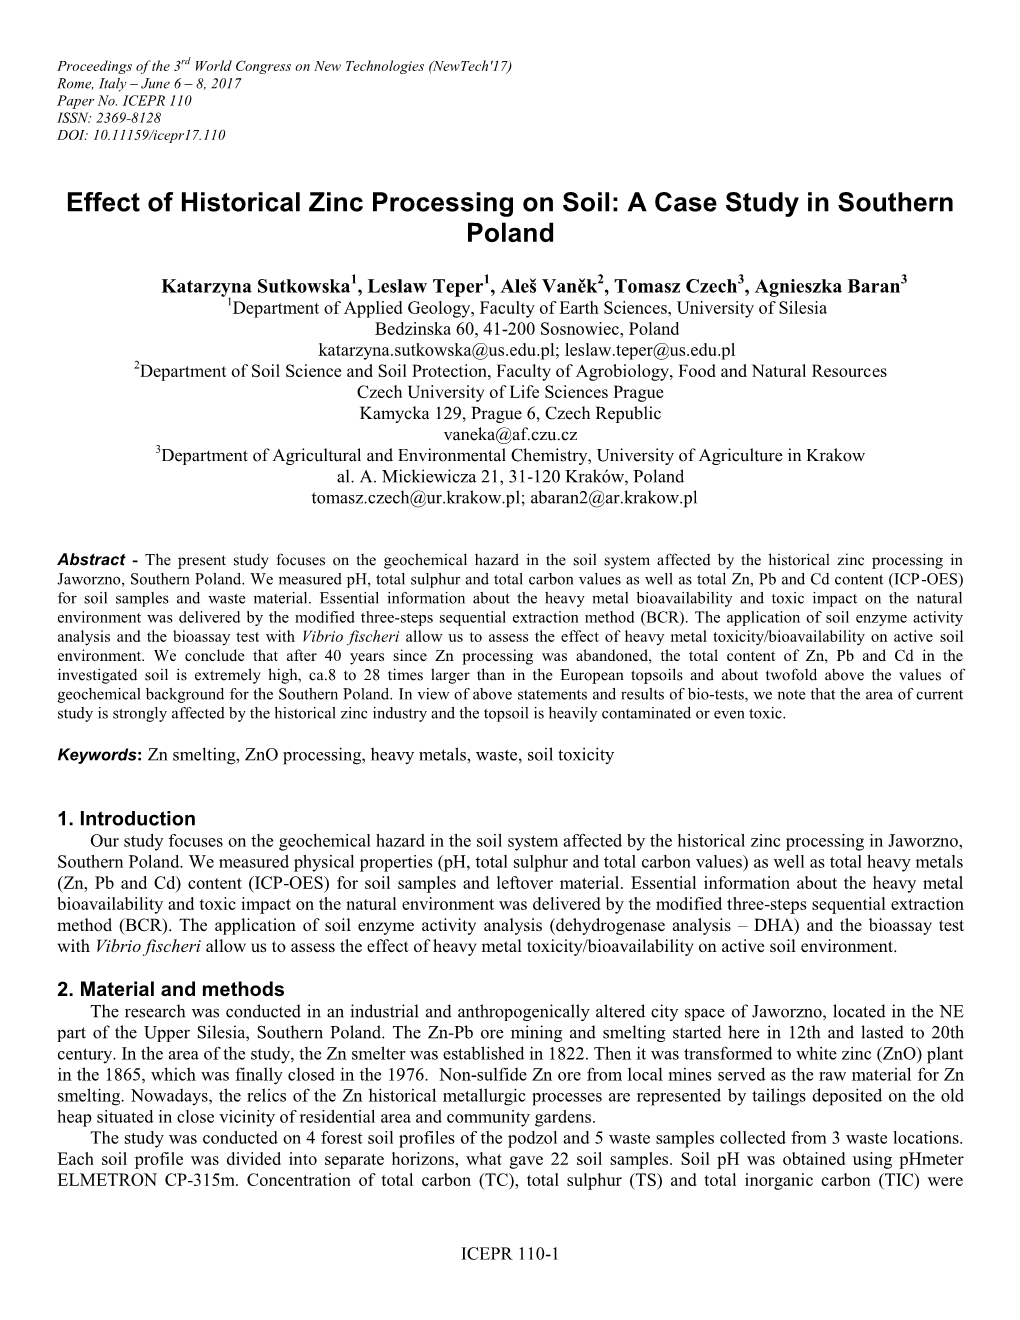 Effect of Historical Zinc Processing on Soil: a Case Study in Southern Poland